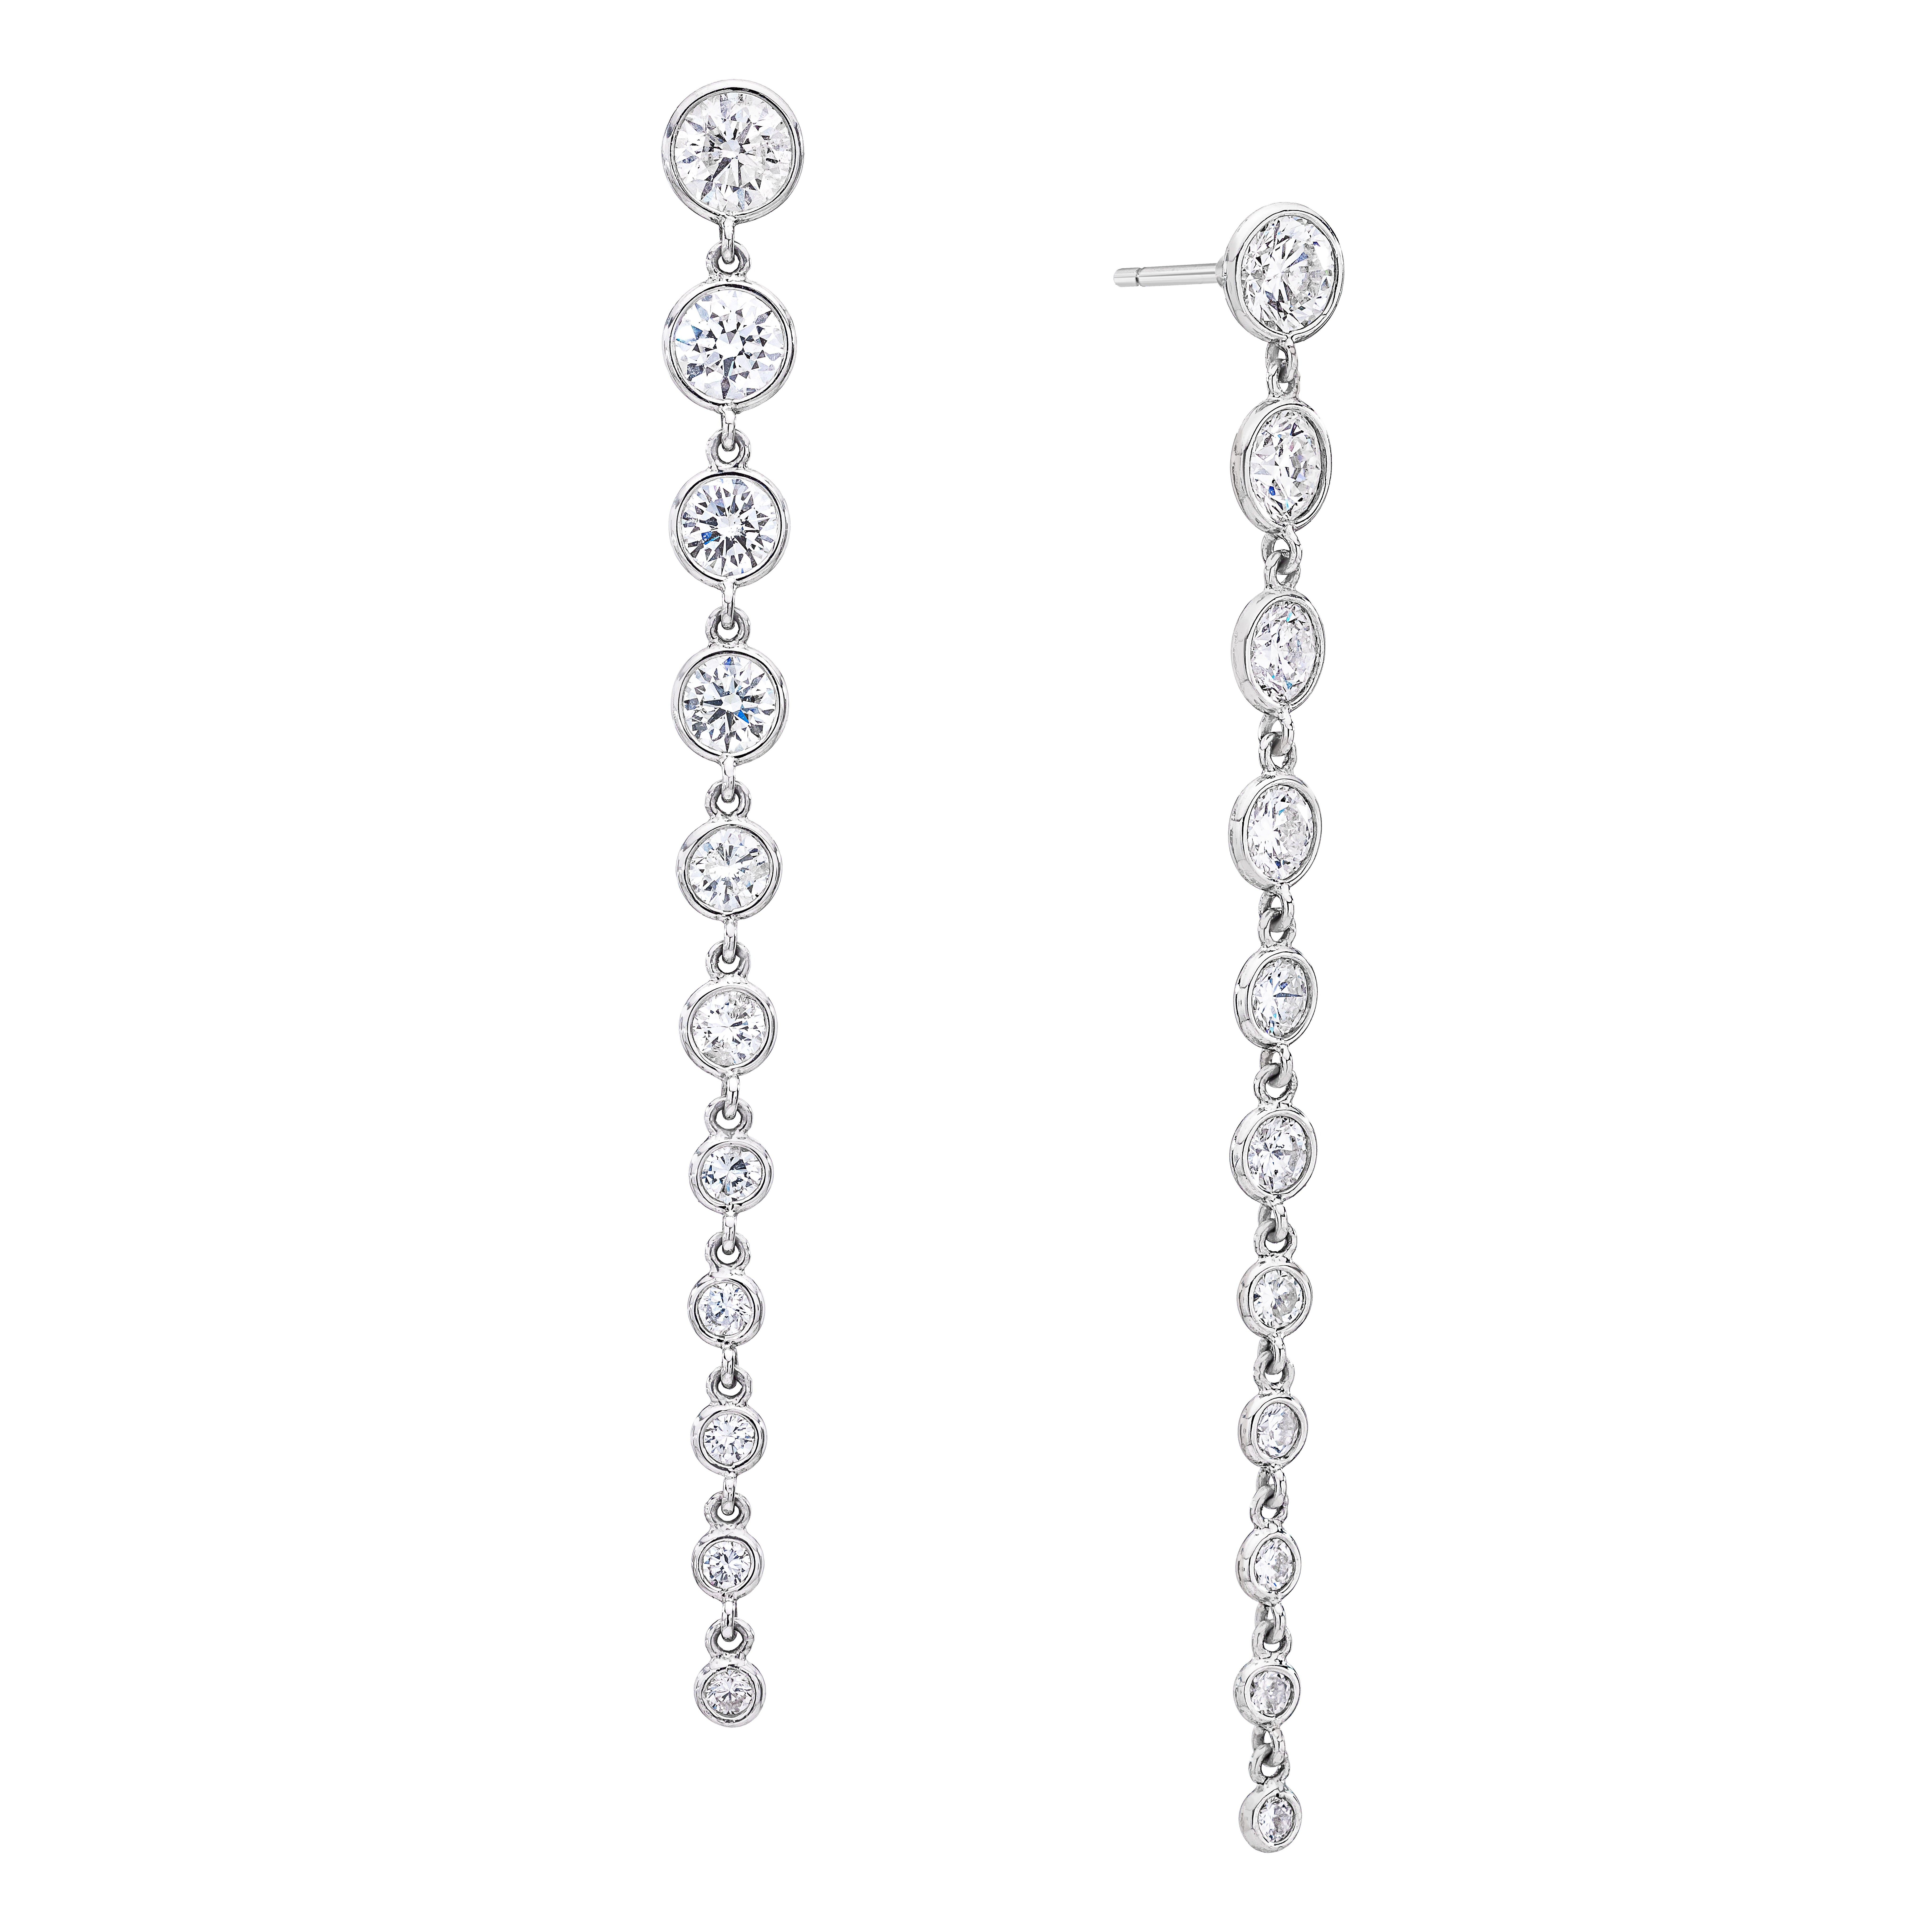 Earring Details:

(22) Diamonds Weighing:  5.01 Carats
Overall Weight:  4.8 grams

Handmade in Platinum 950

Length:  2 1/2